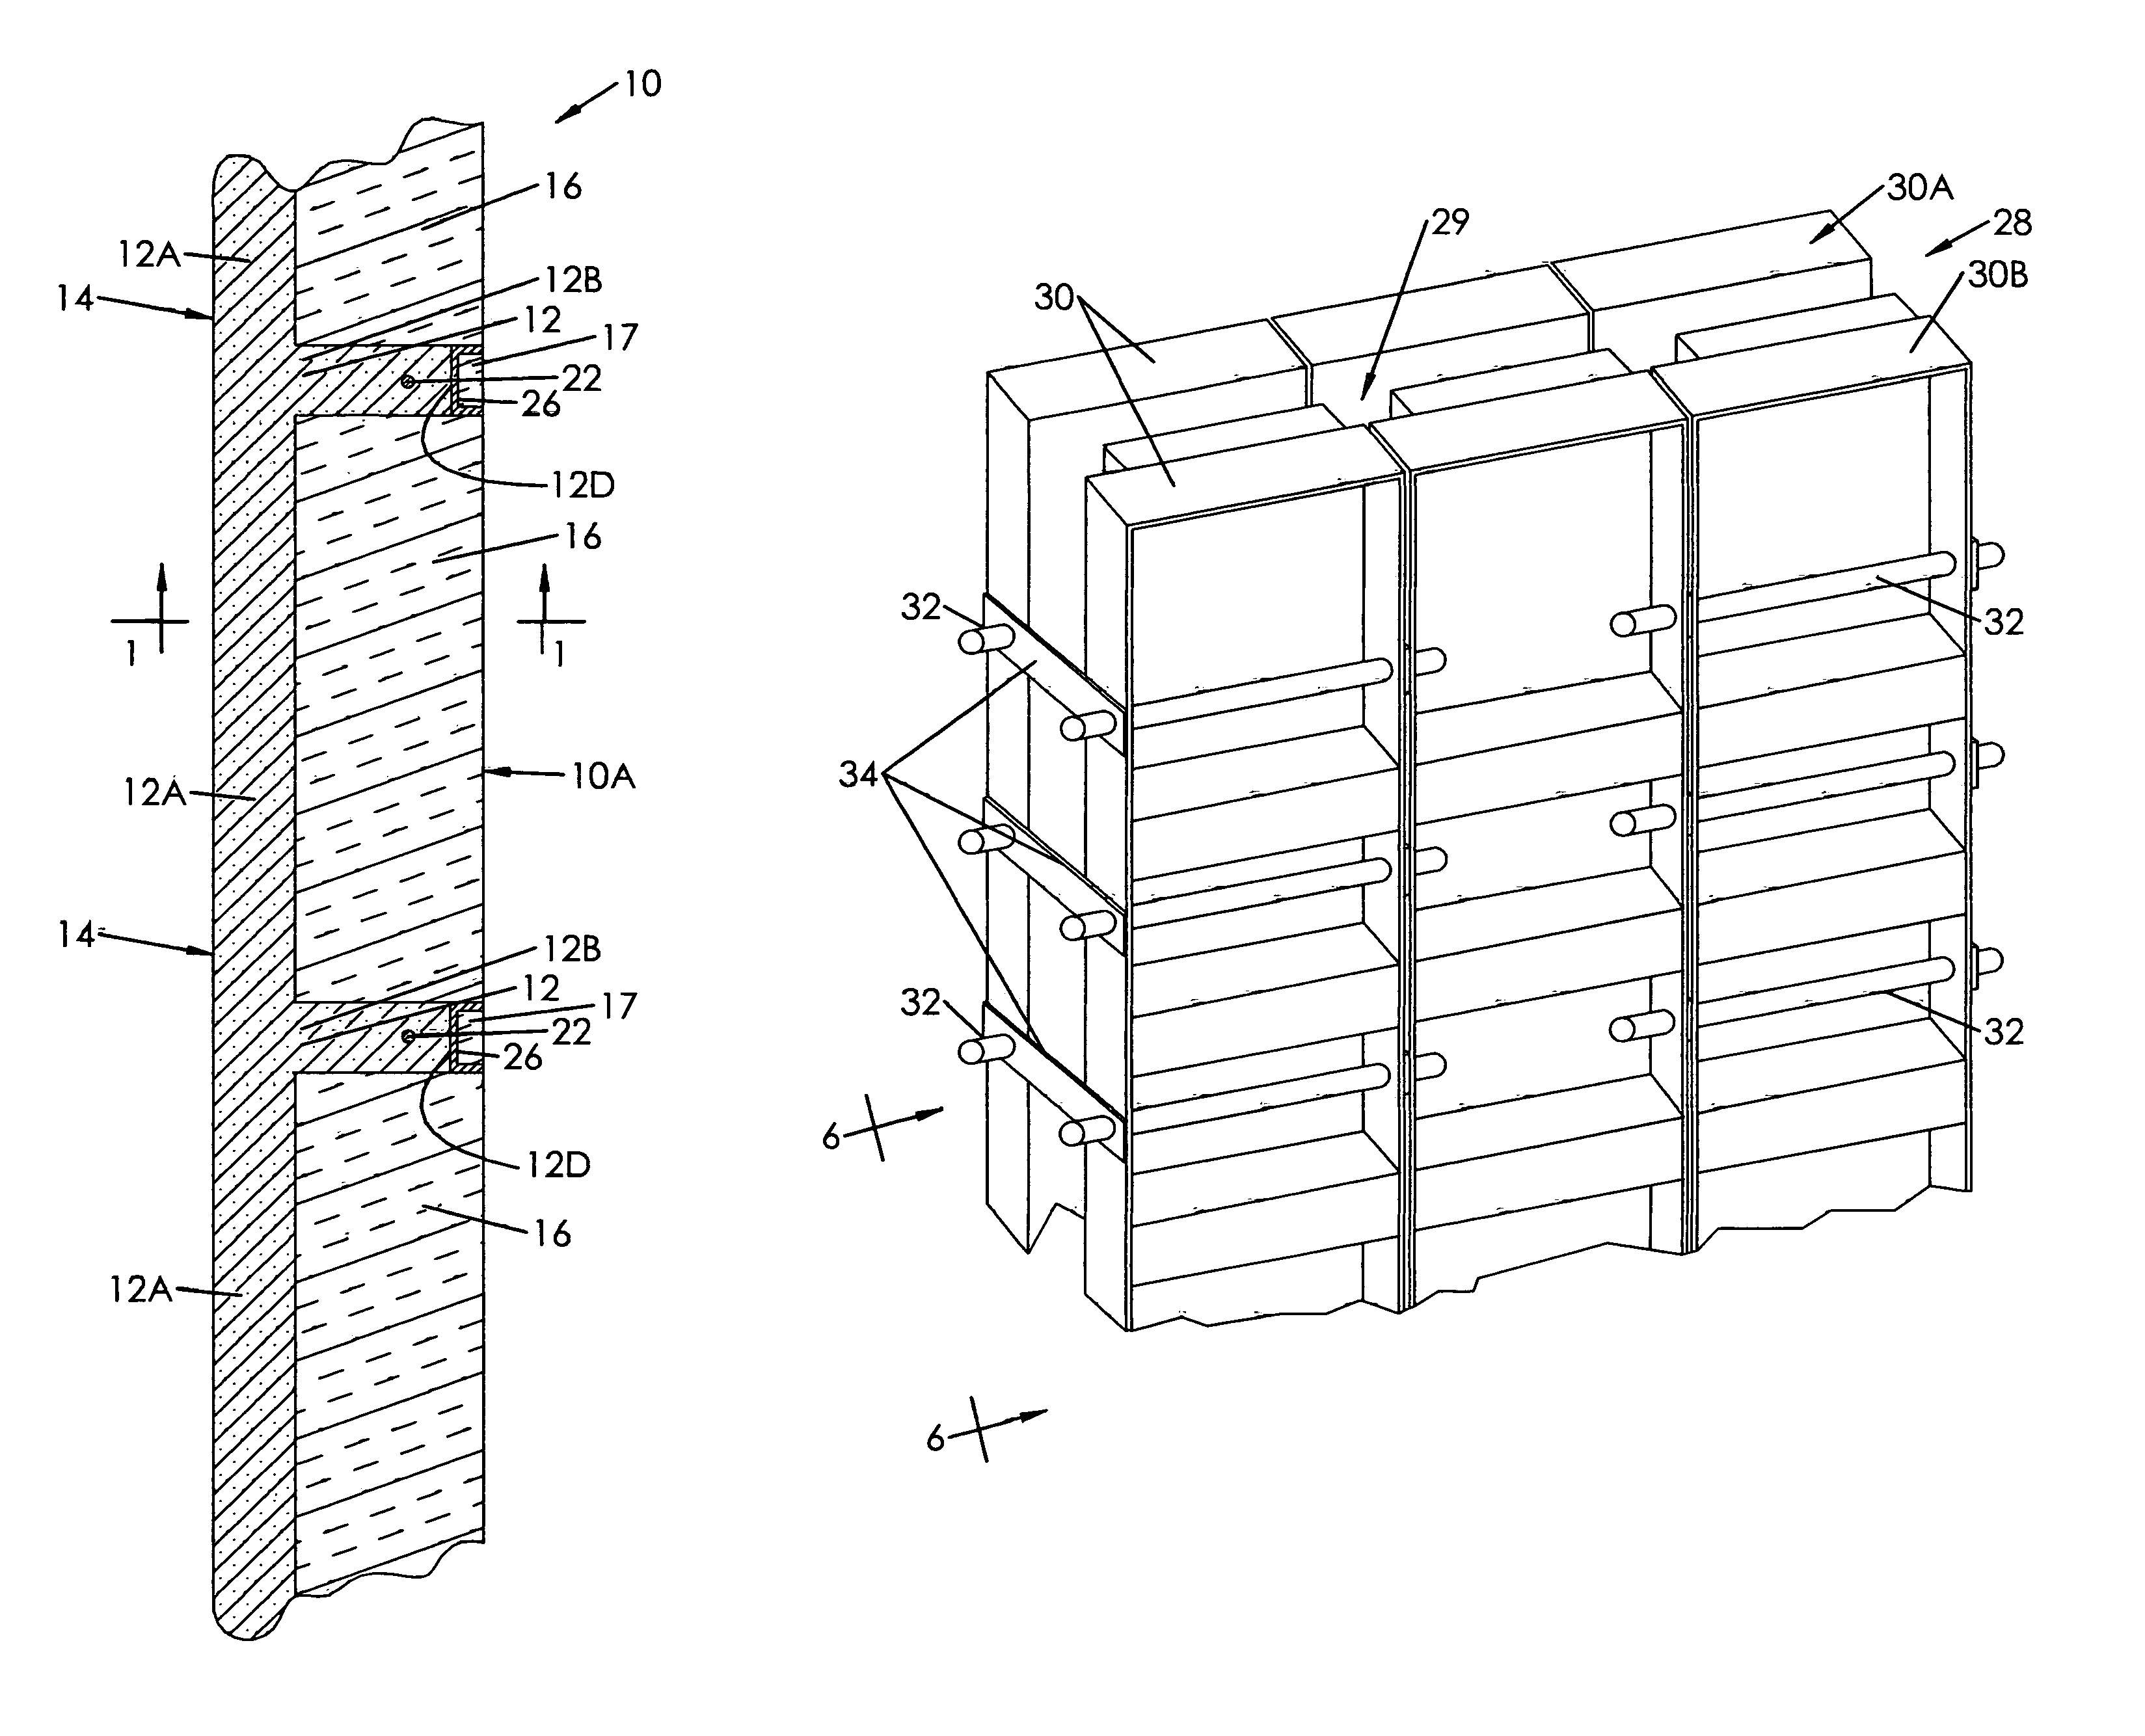 Insulated poured concrete wall structure with integal T-beam supports and method of making same